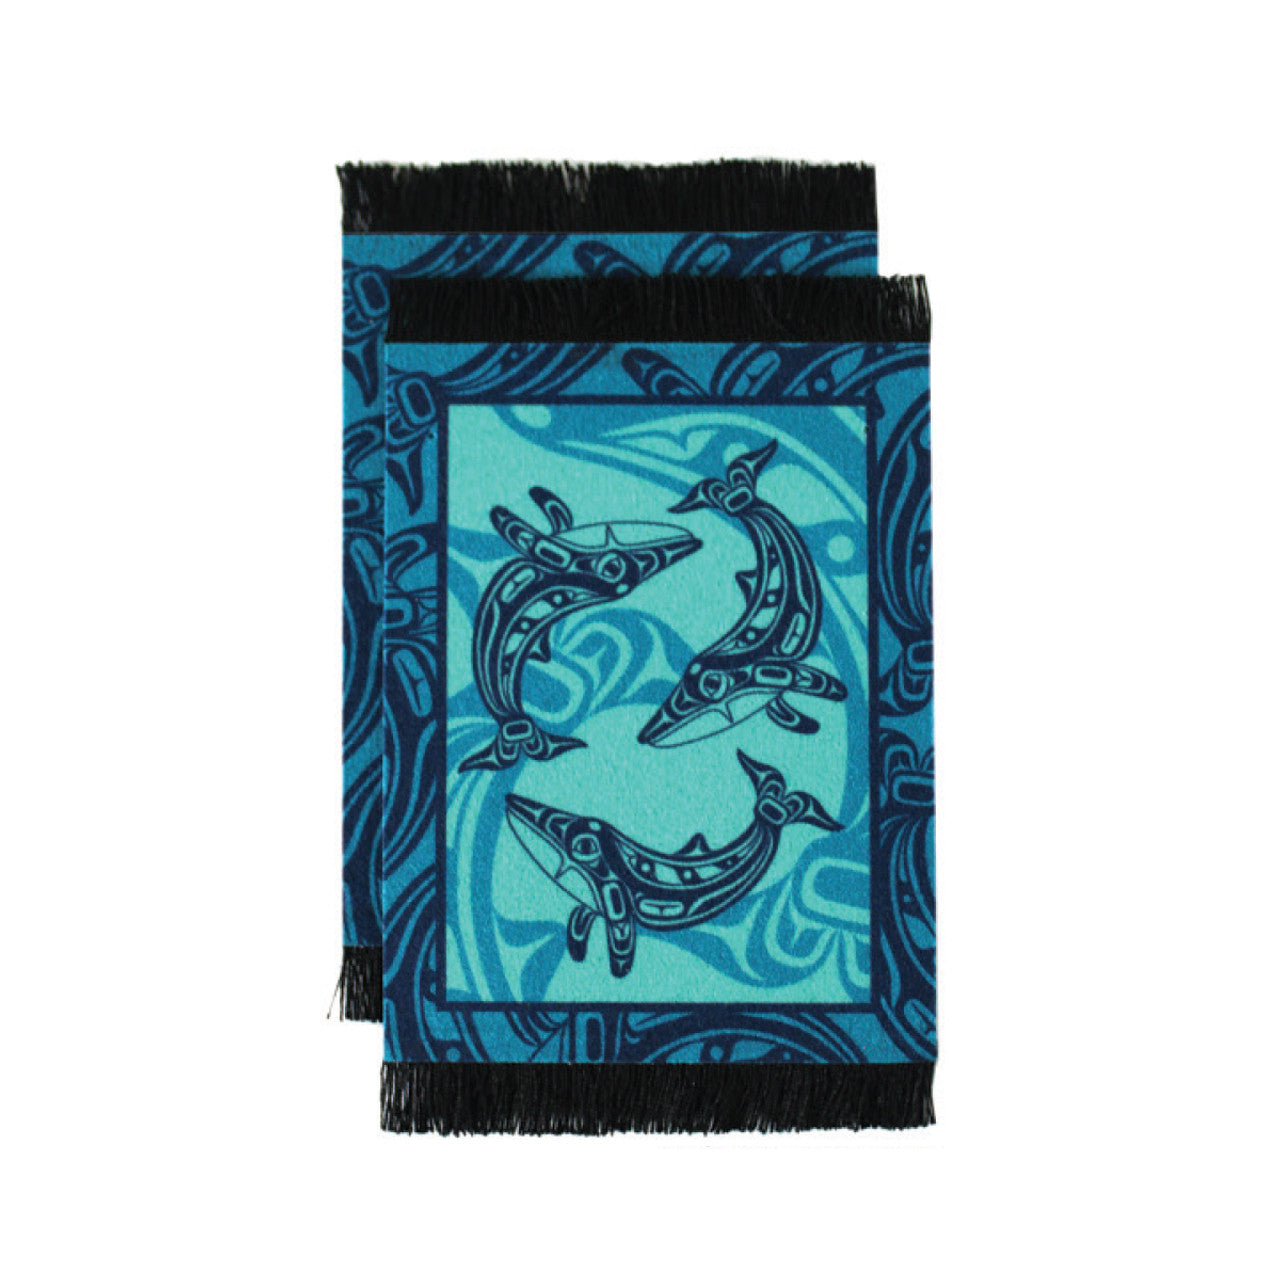 BLANKET COASTERS - Humpback Whale - BLC21 - House of Himwitsa Native Art Gallery and Gifts